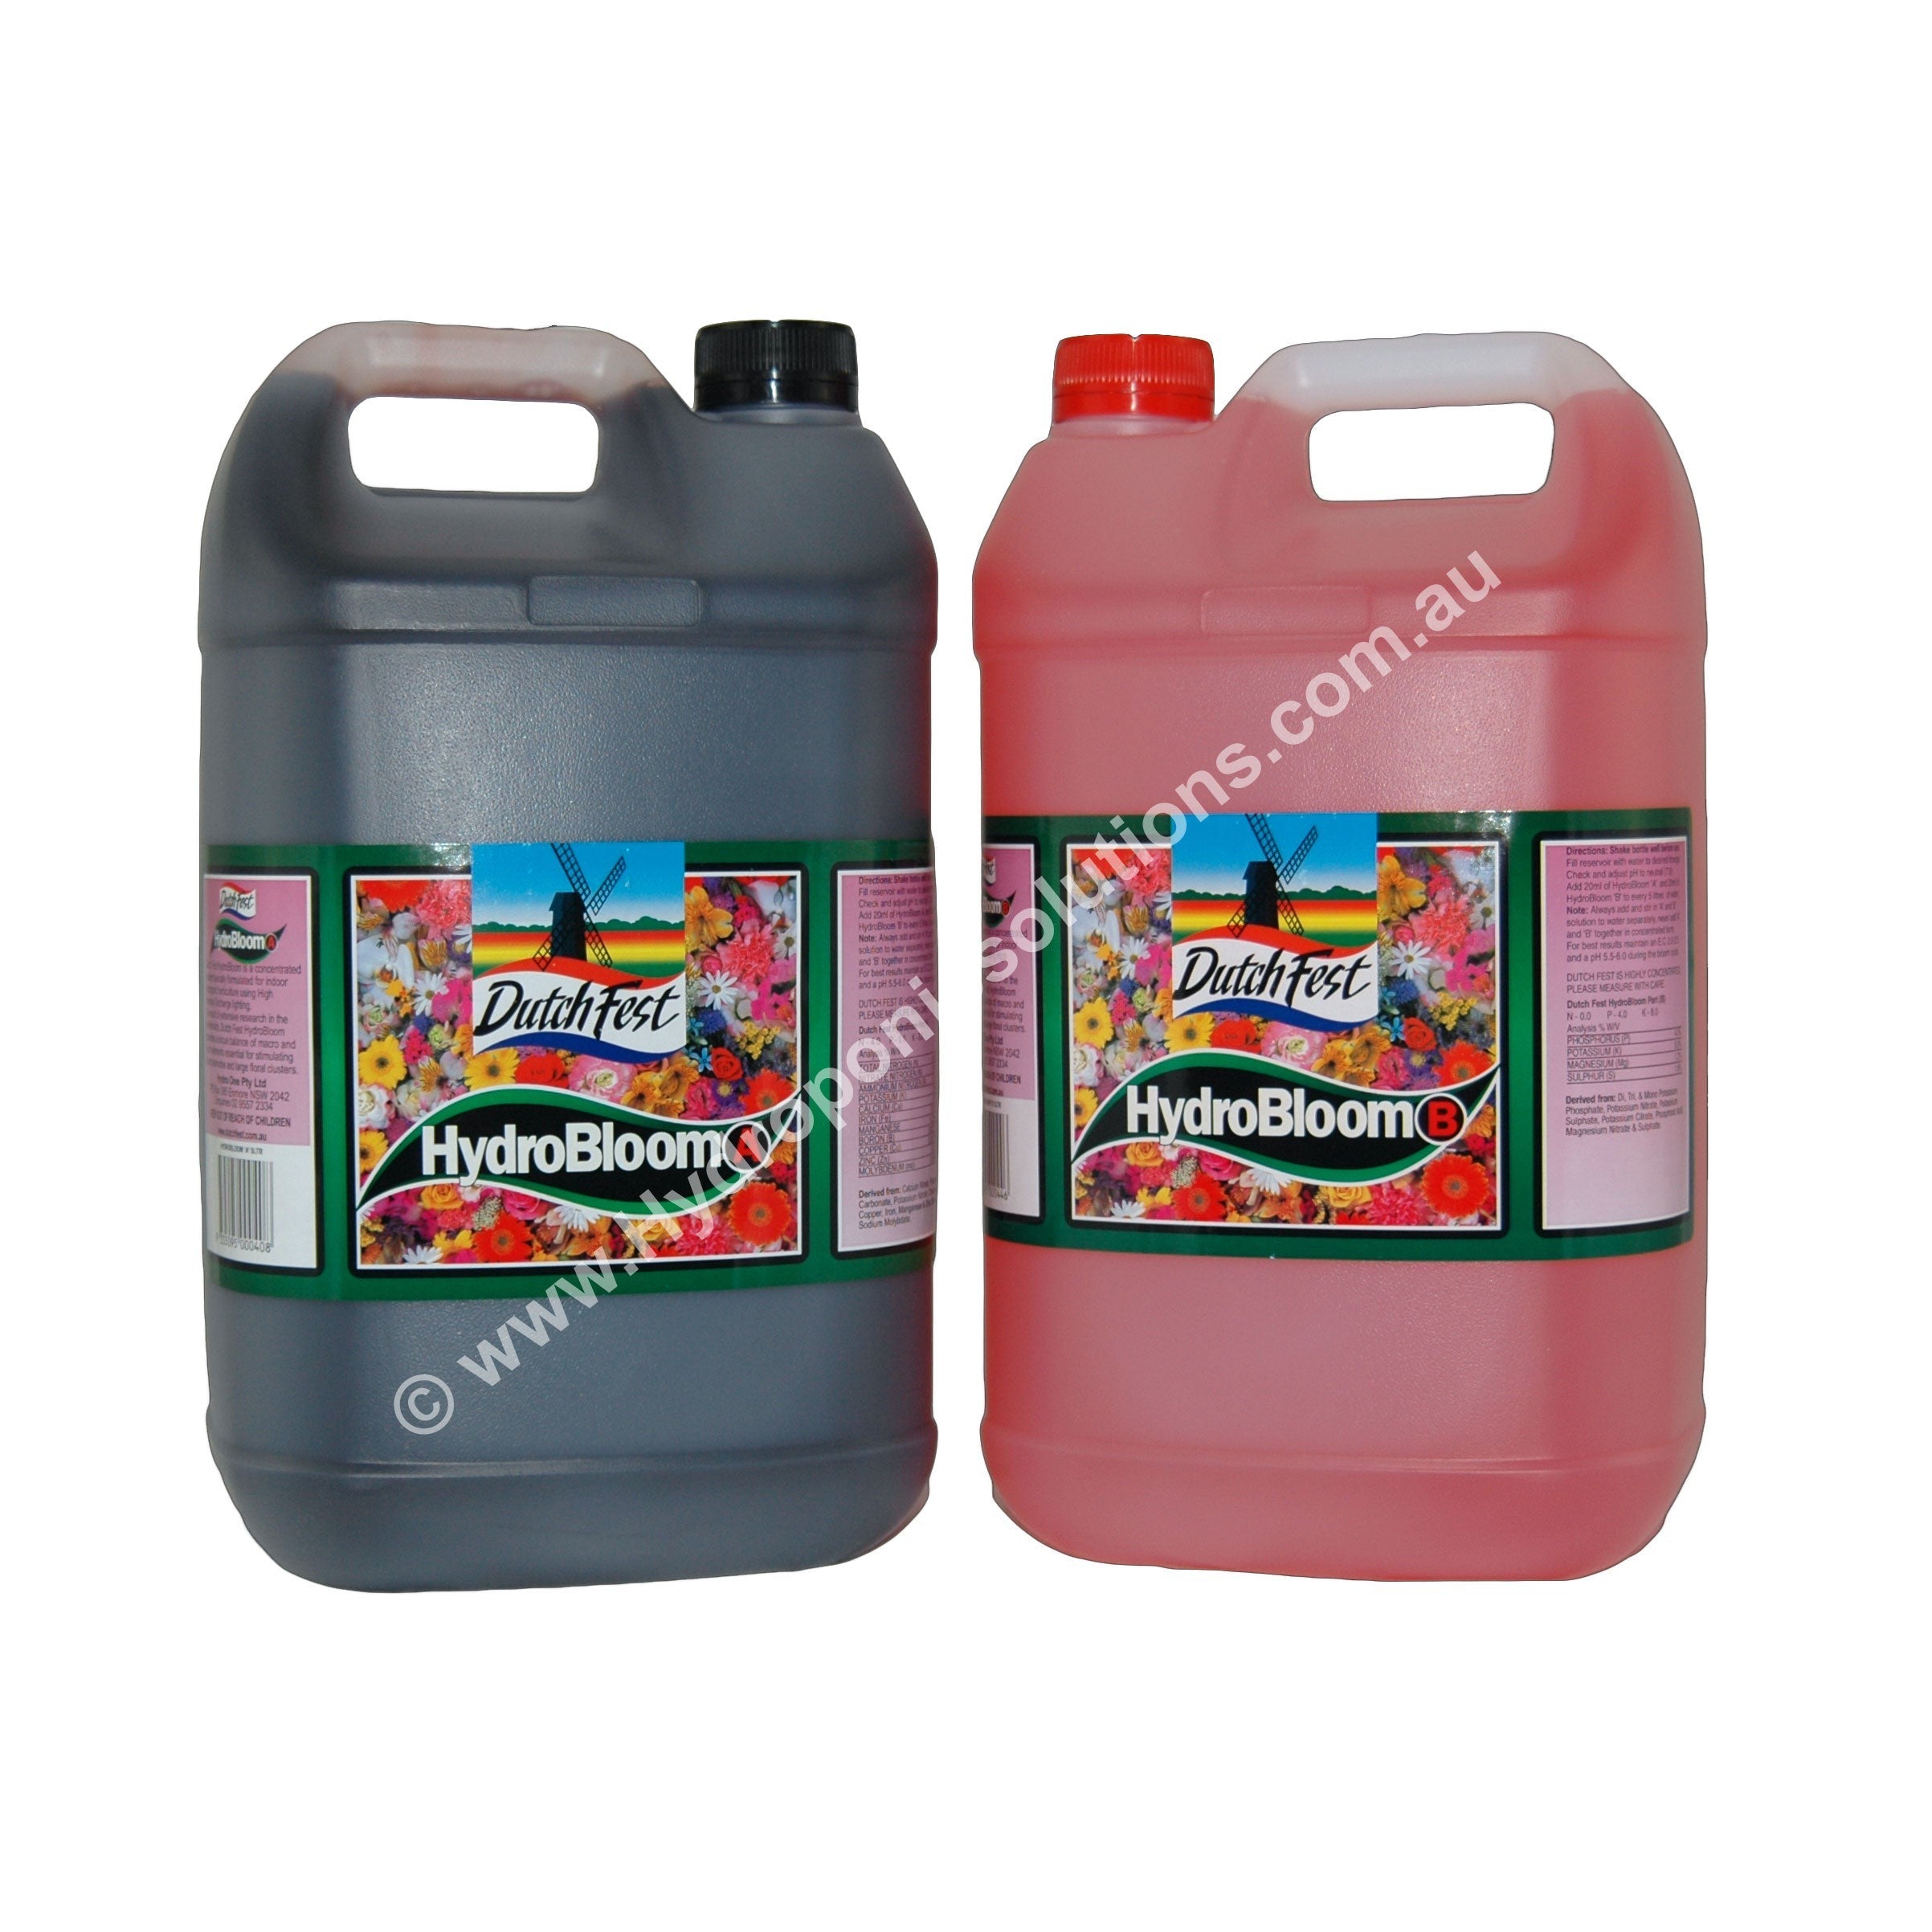 Dutch Fest HydroBloom Hydroponic Bloom Nutrient Concentrate - Hydroponic Solutions